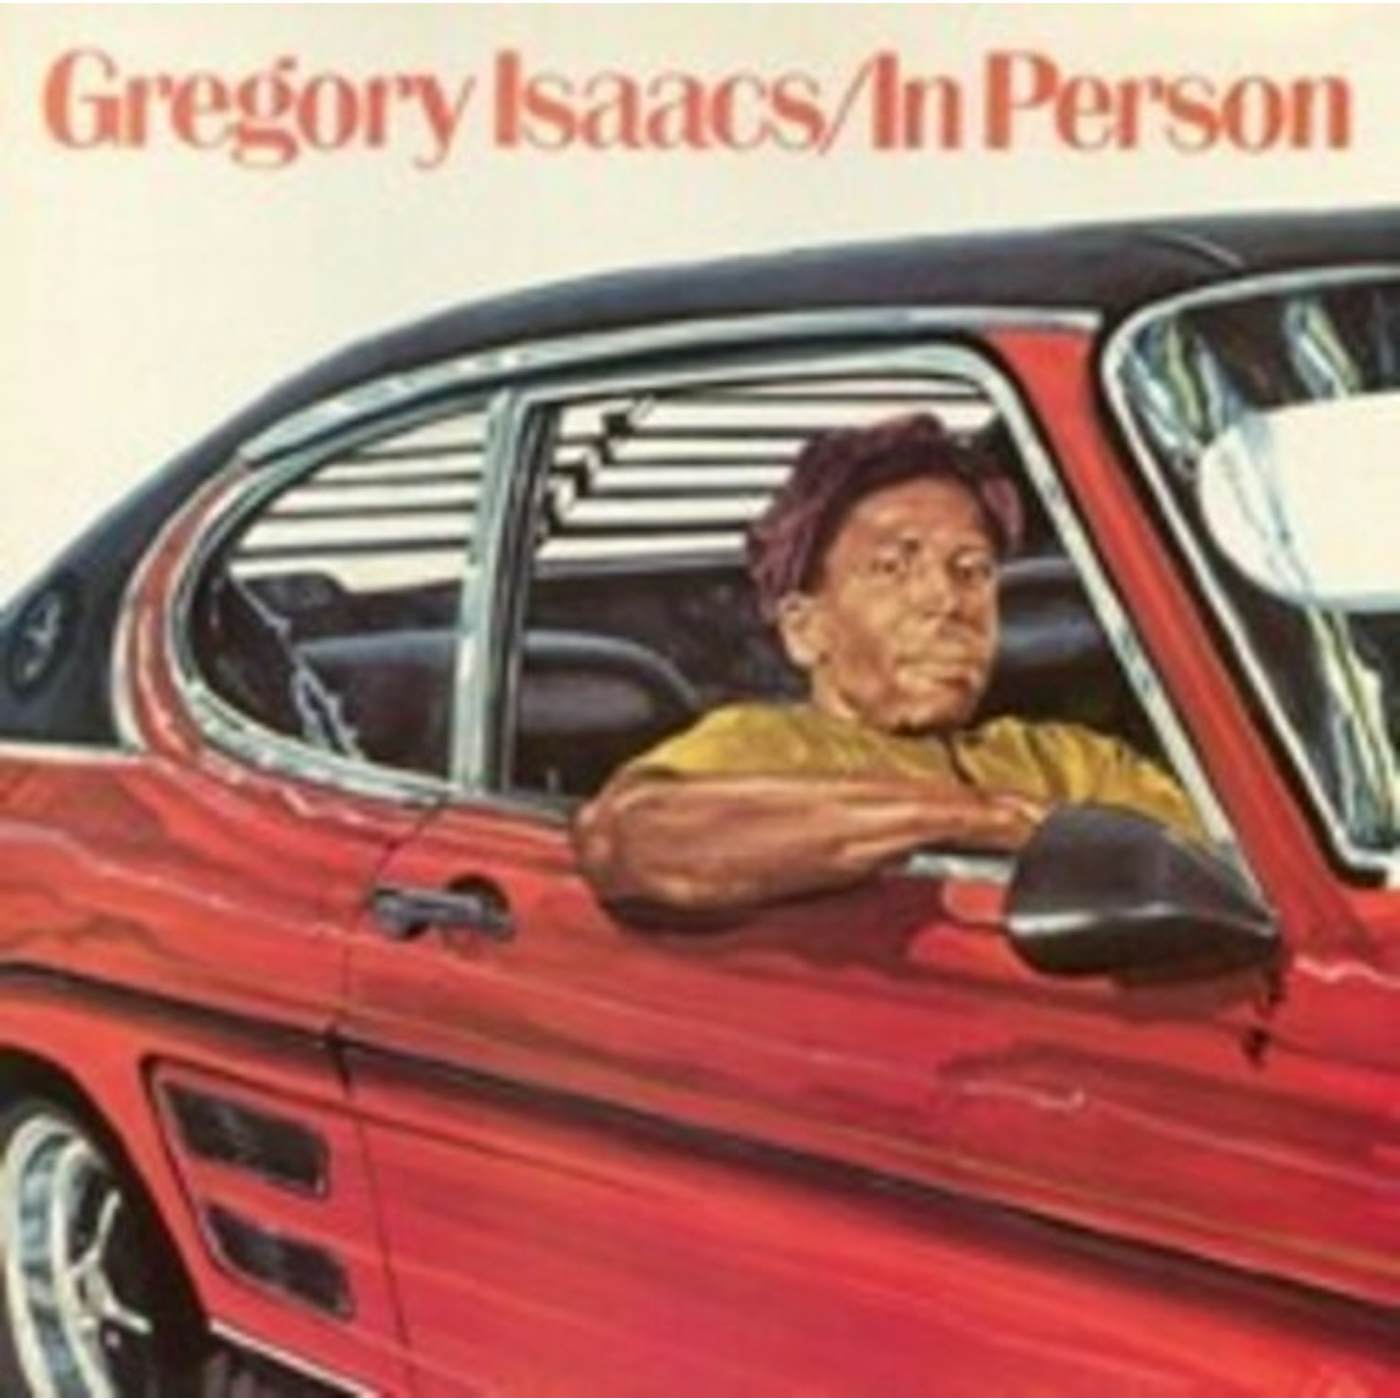 Gregory Isaacs IN PERSON CD